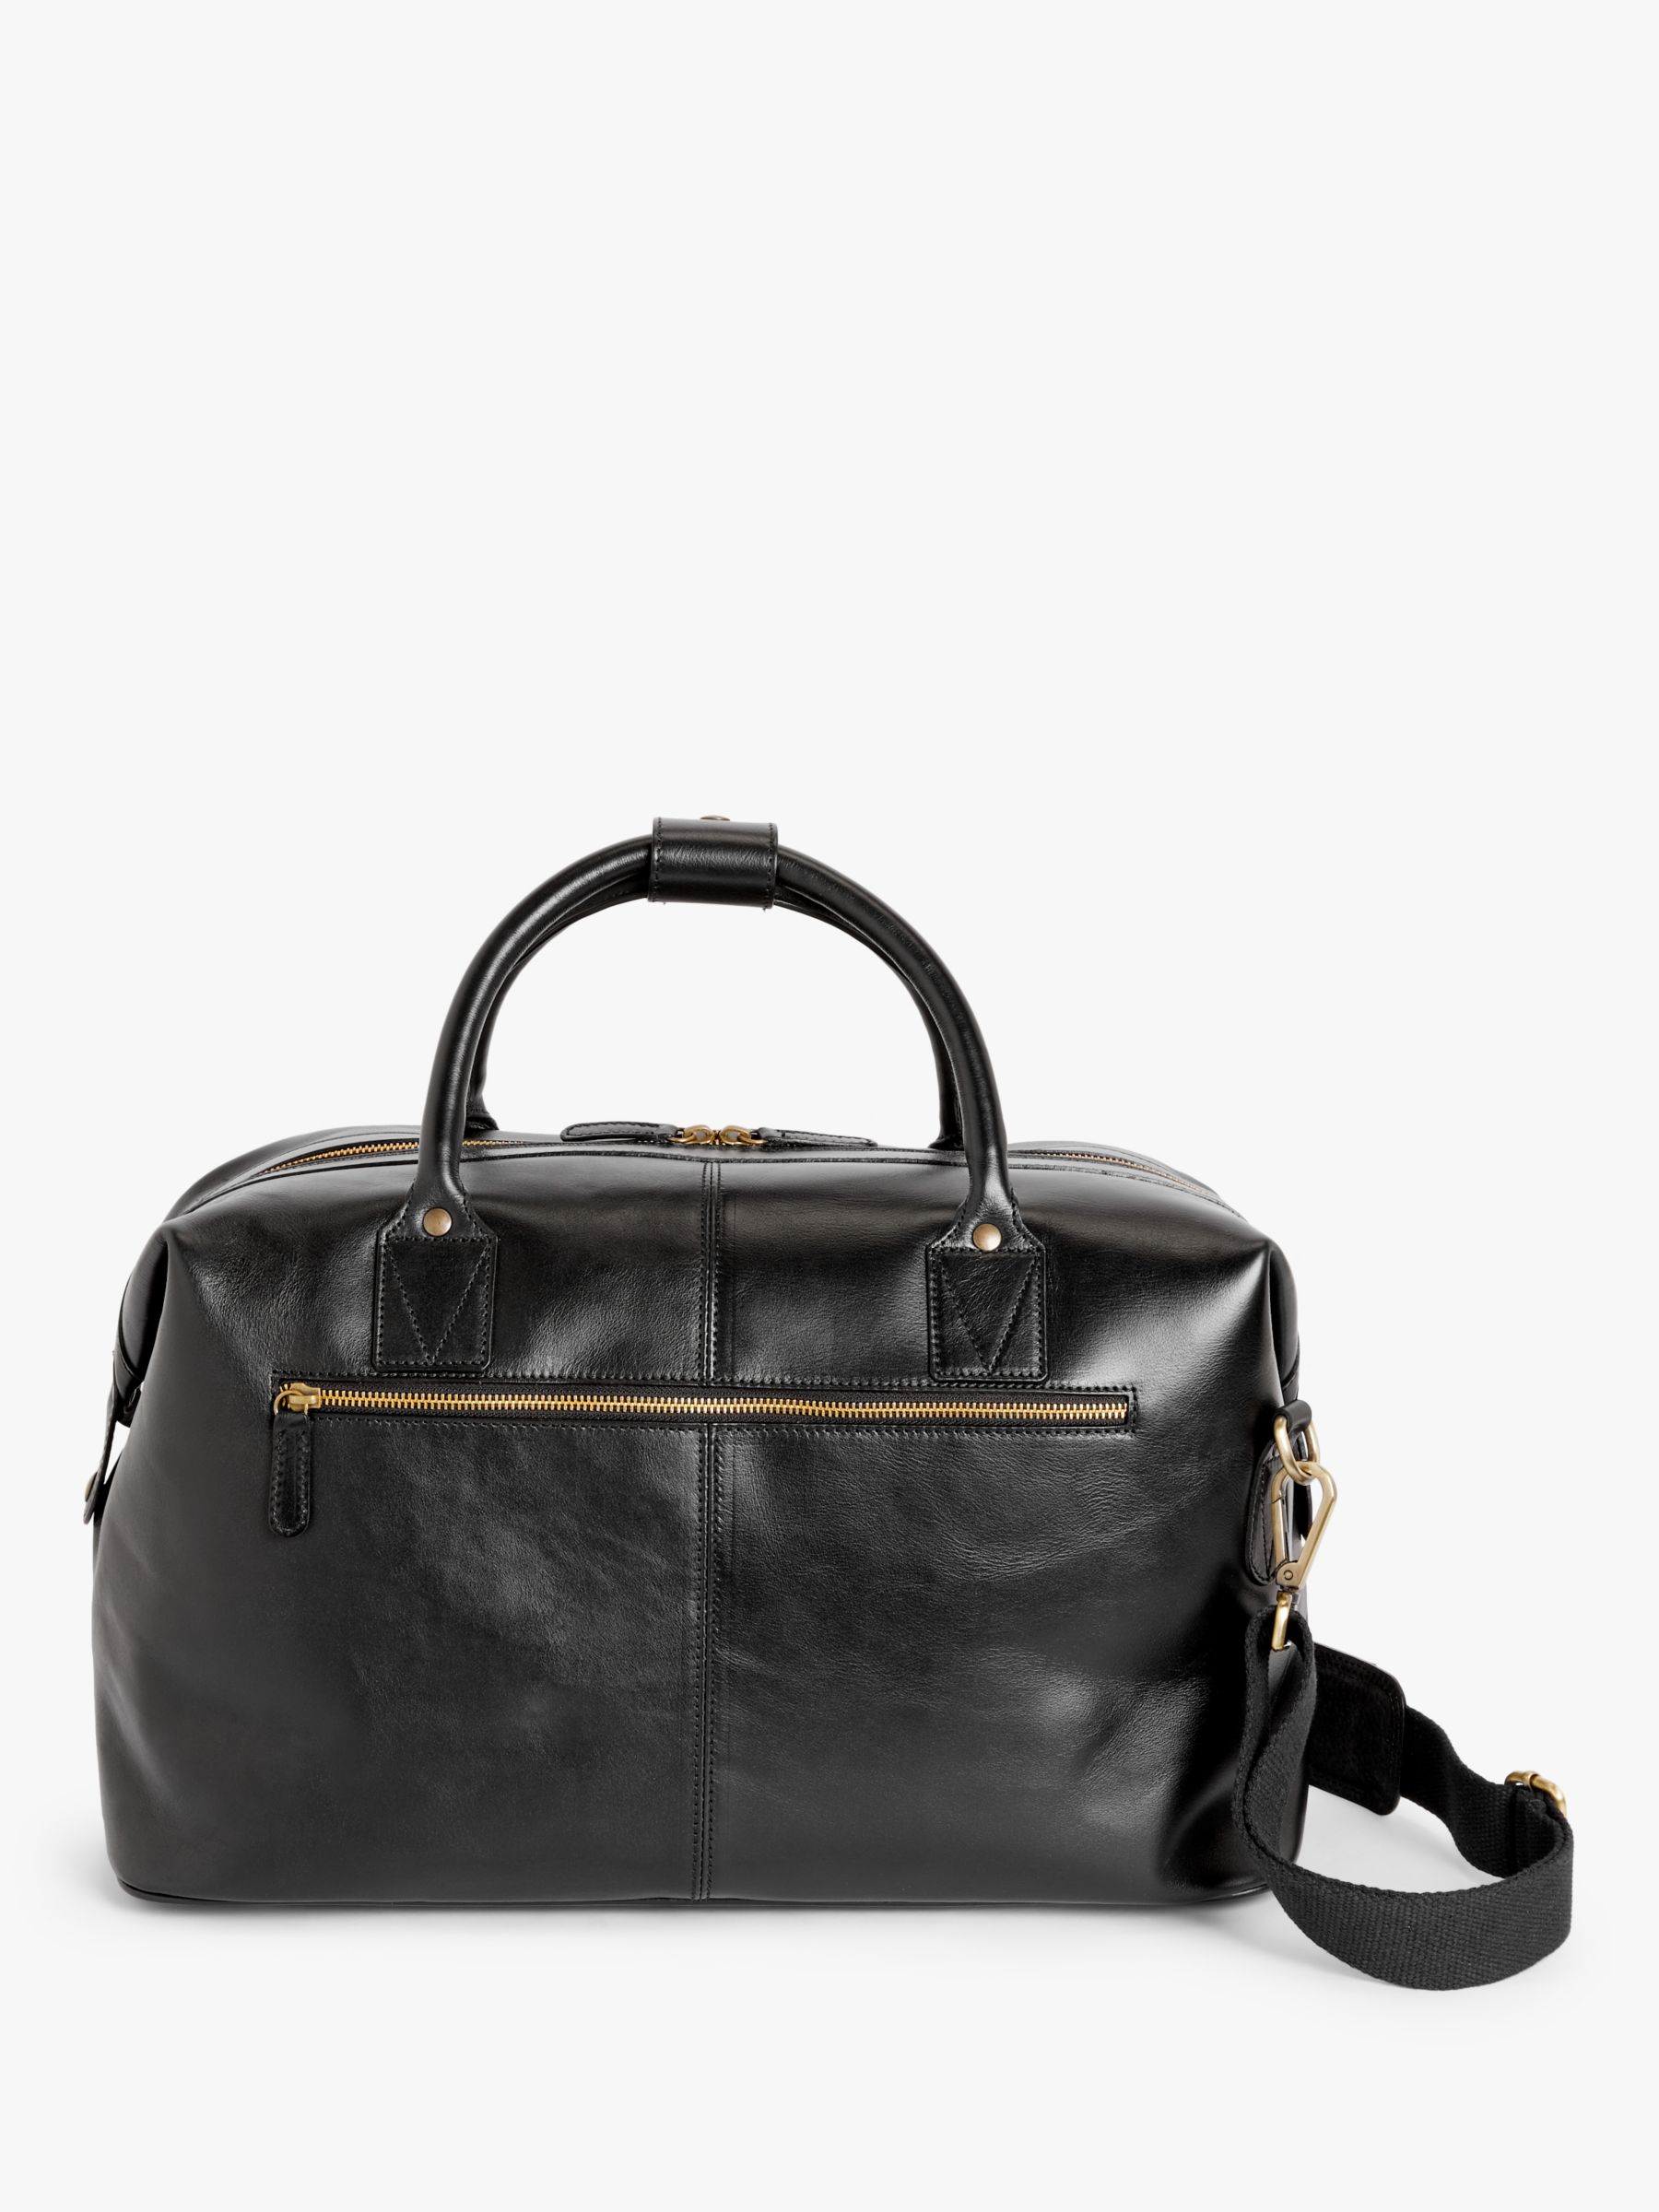 John Lewis Made in Italy Leather Holdall, Black at John Lewis & Partners